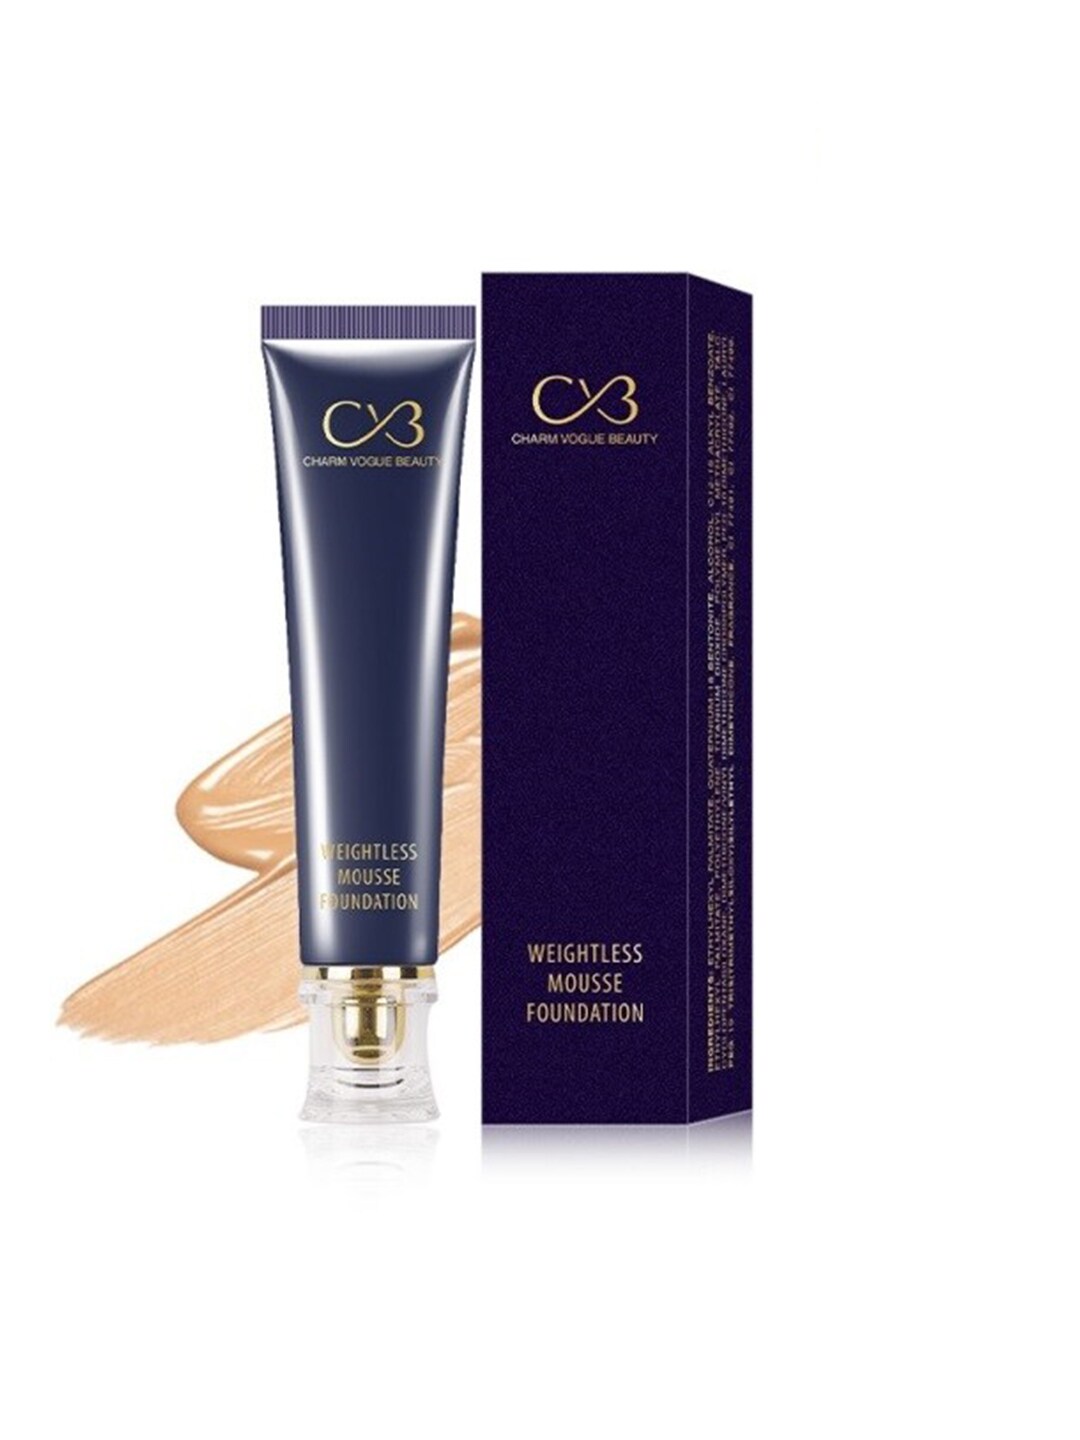 CVB Weightless Mousse Foundation - Soft Ivory 02 Price in India